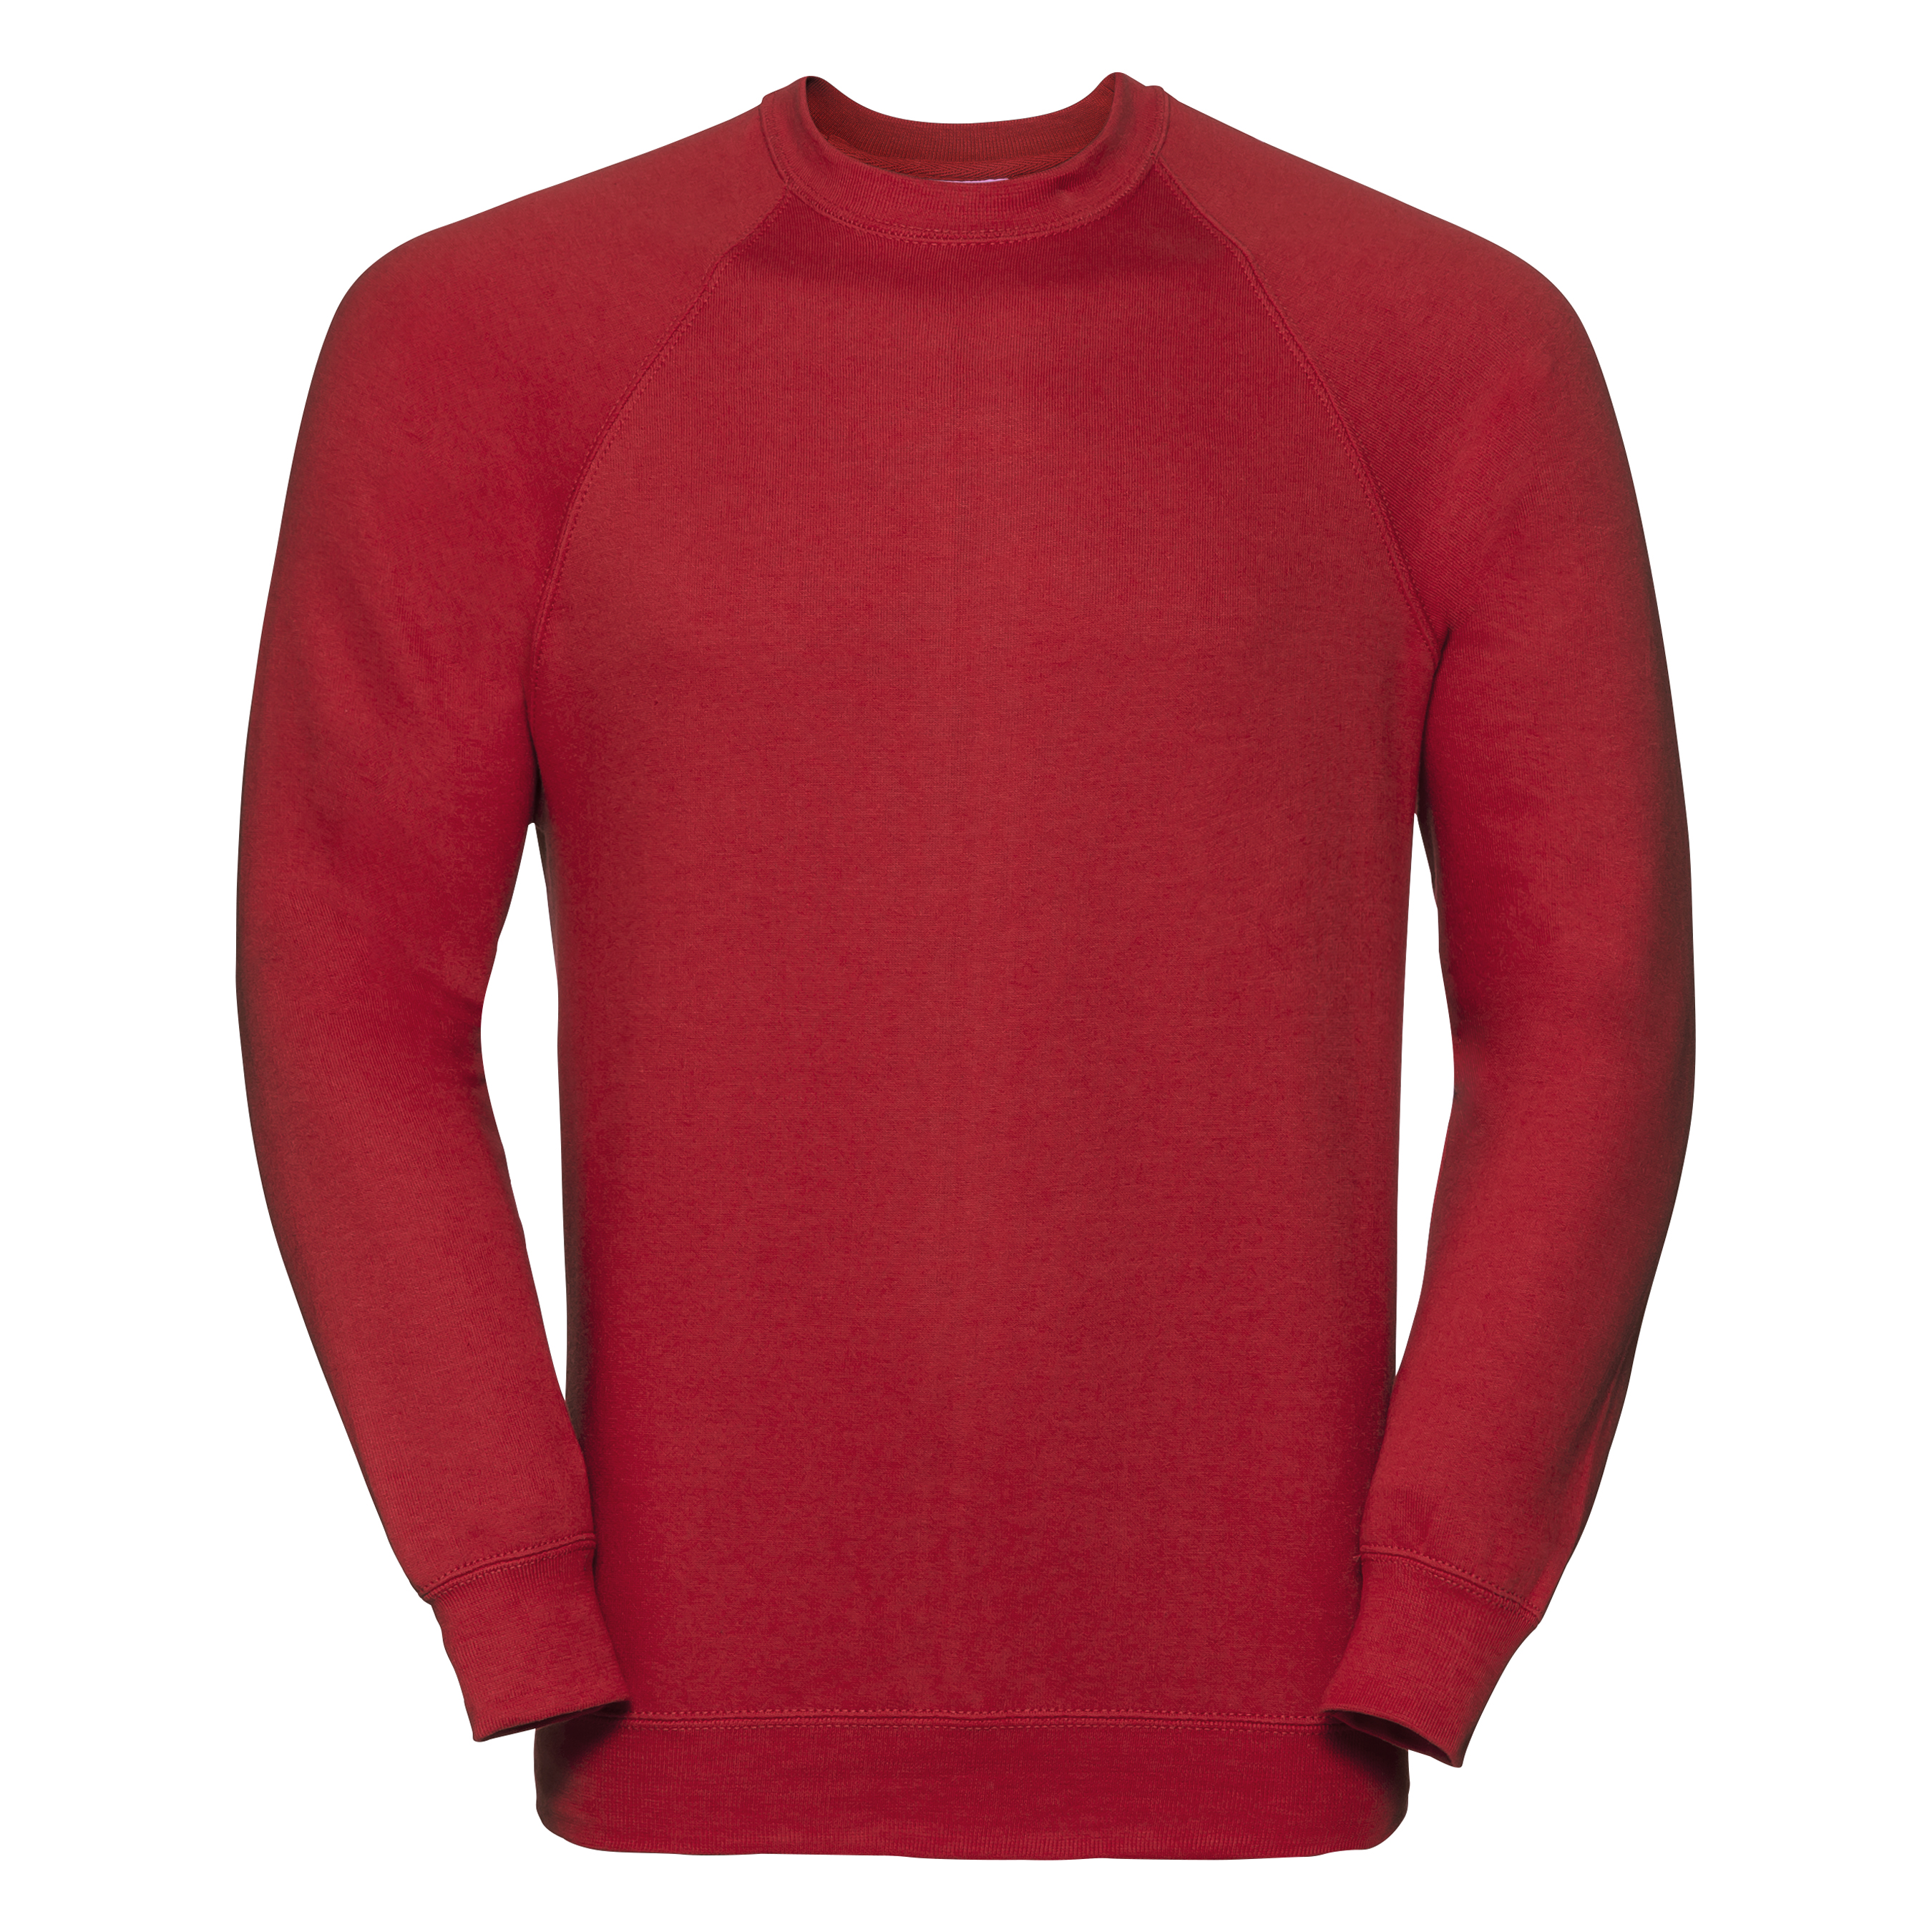 ax-httpswebsystems.s3.amazonaws.comtmp_for_downloadrussell-classic-sweatshirt-bright-red.jpg